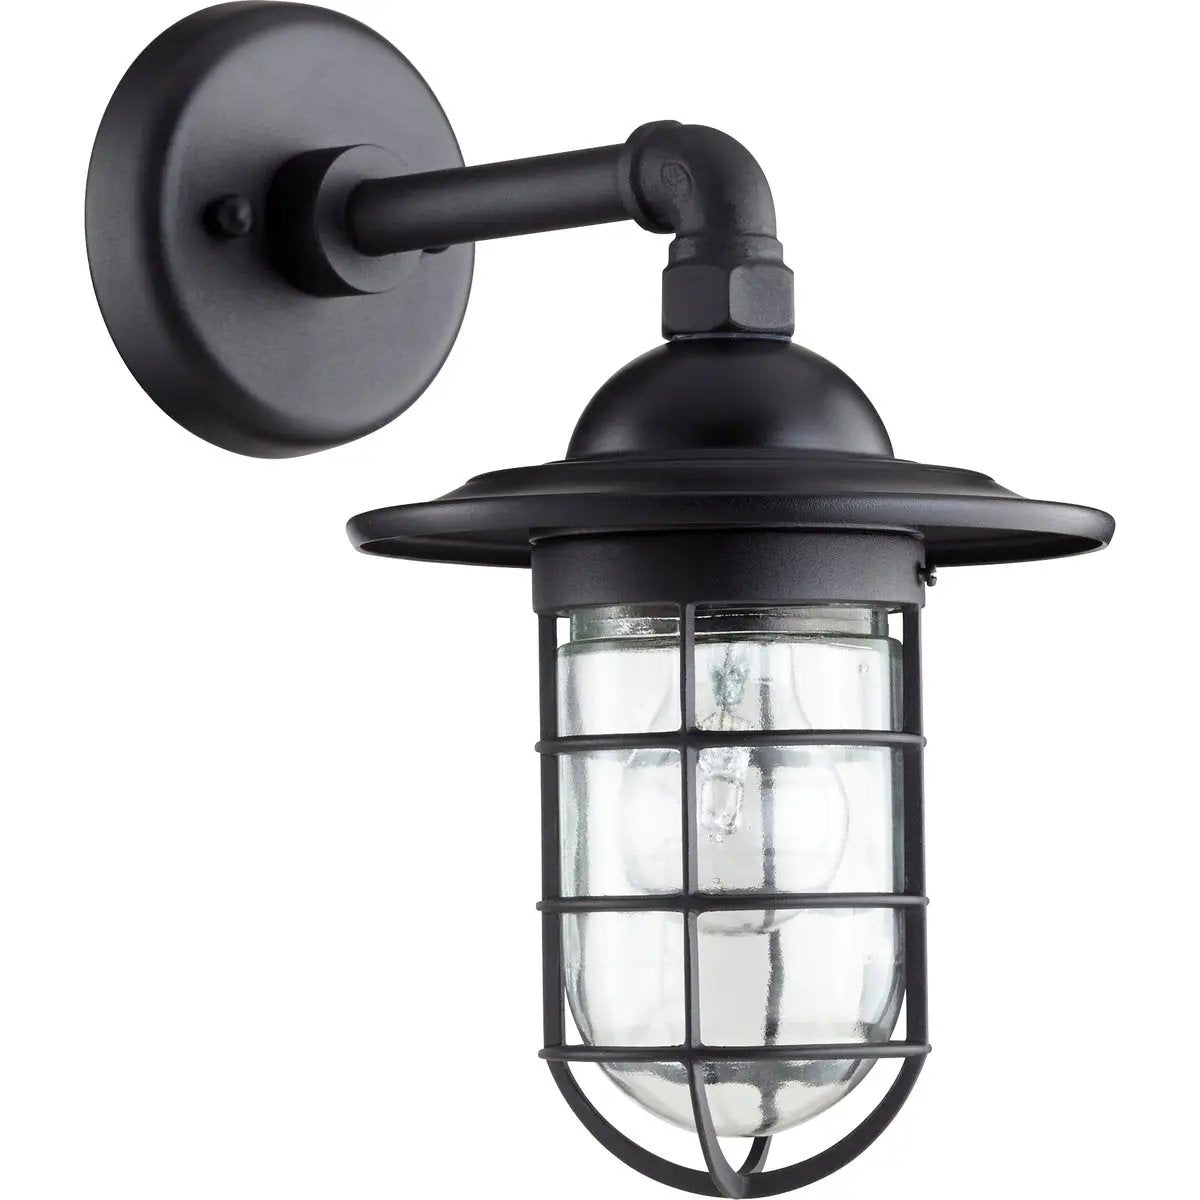 Coastal Outdoor Wall Light with Clear Glass Shade, perfect for coastal and rustic outdoor settings. Adds exceptional style and welcoming light to home exteriors. Fits in front or back entryway, garage door. 7.5&quot;W x 12.25&quot;H x 12&quot;E. 60W, 120V, Medium E26 base. UL Listed, Wet Location. 2-year warranty.